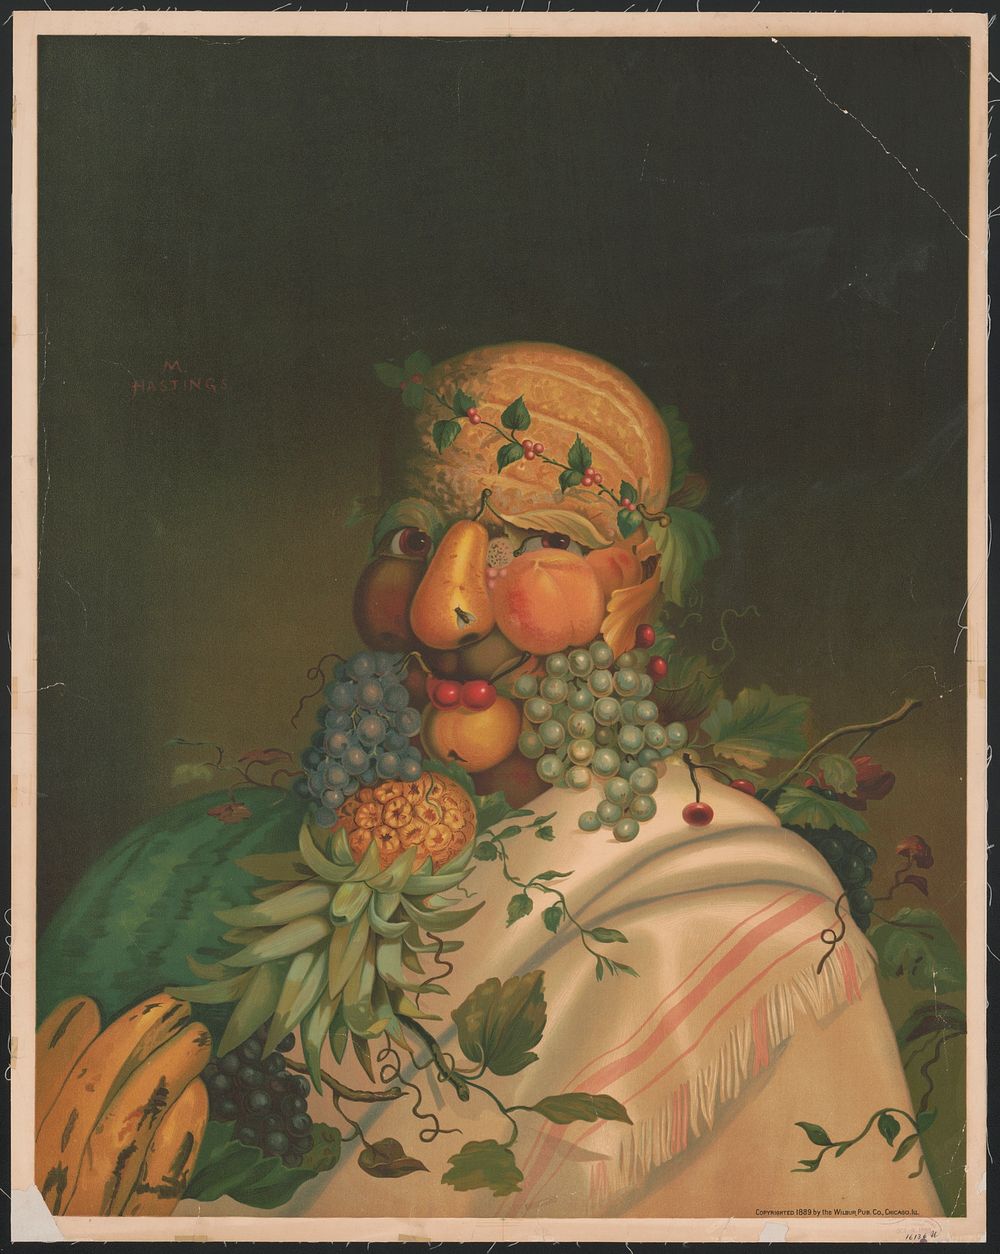 [Fruits arranged to form a man's face and hand]